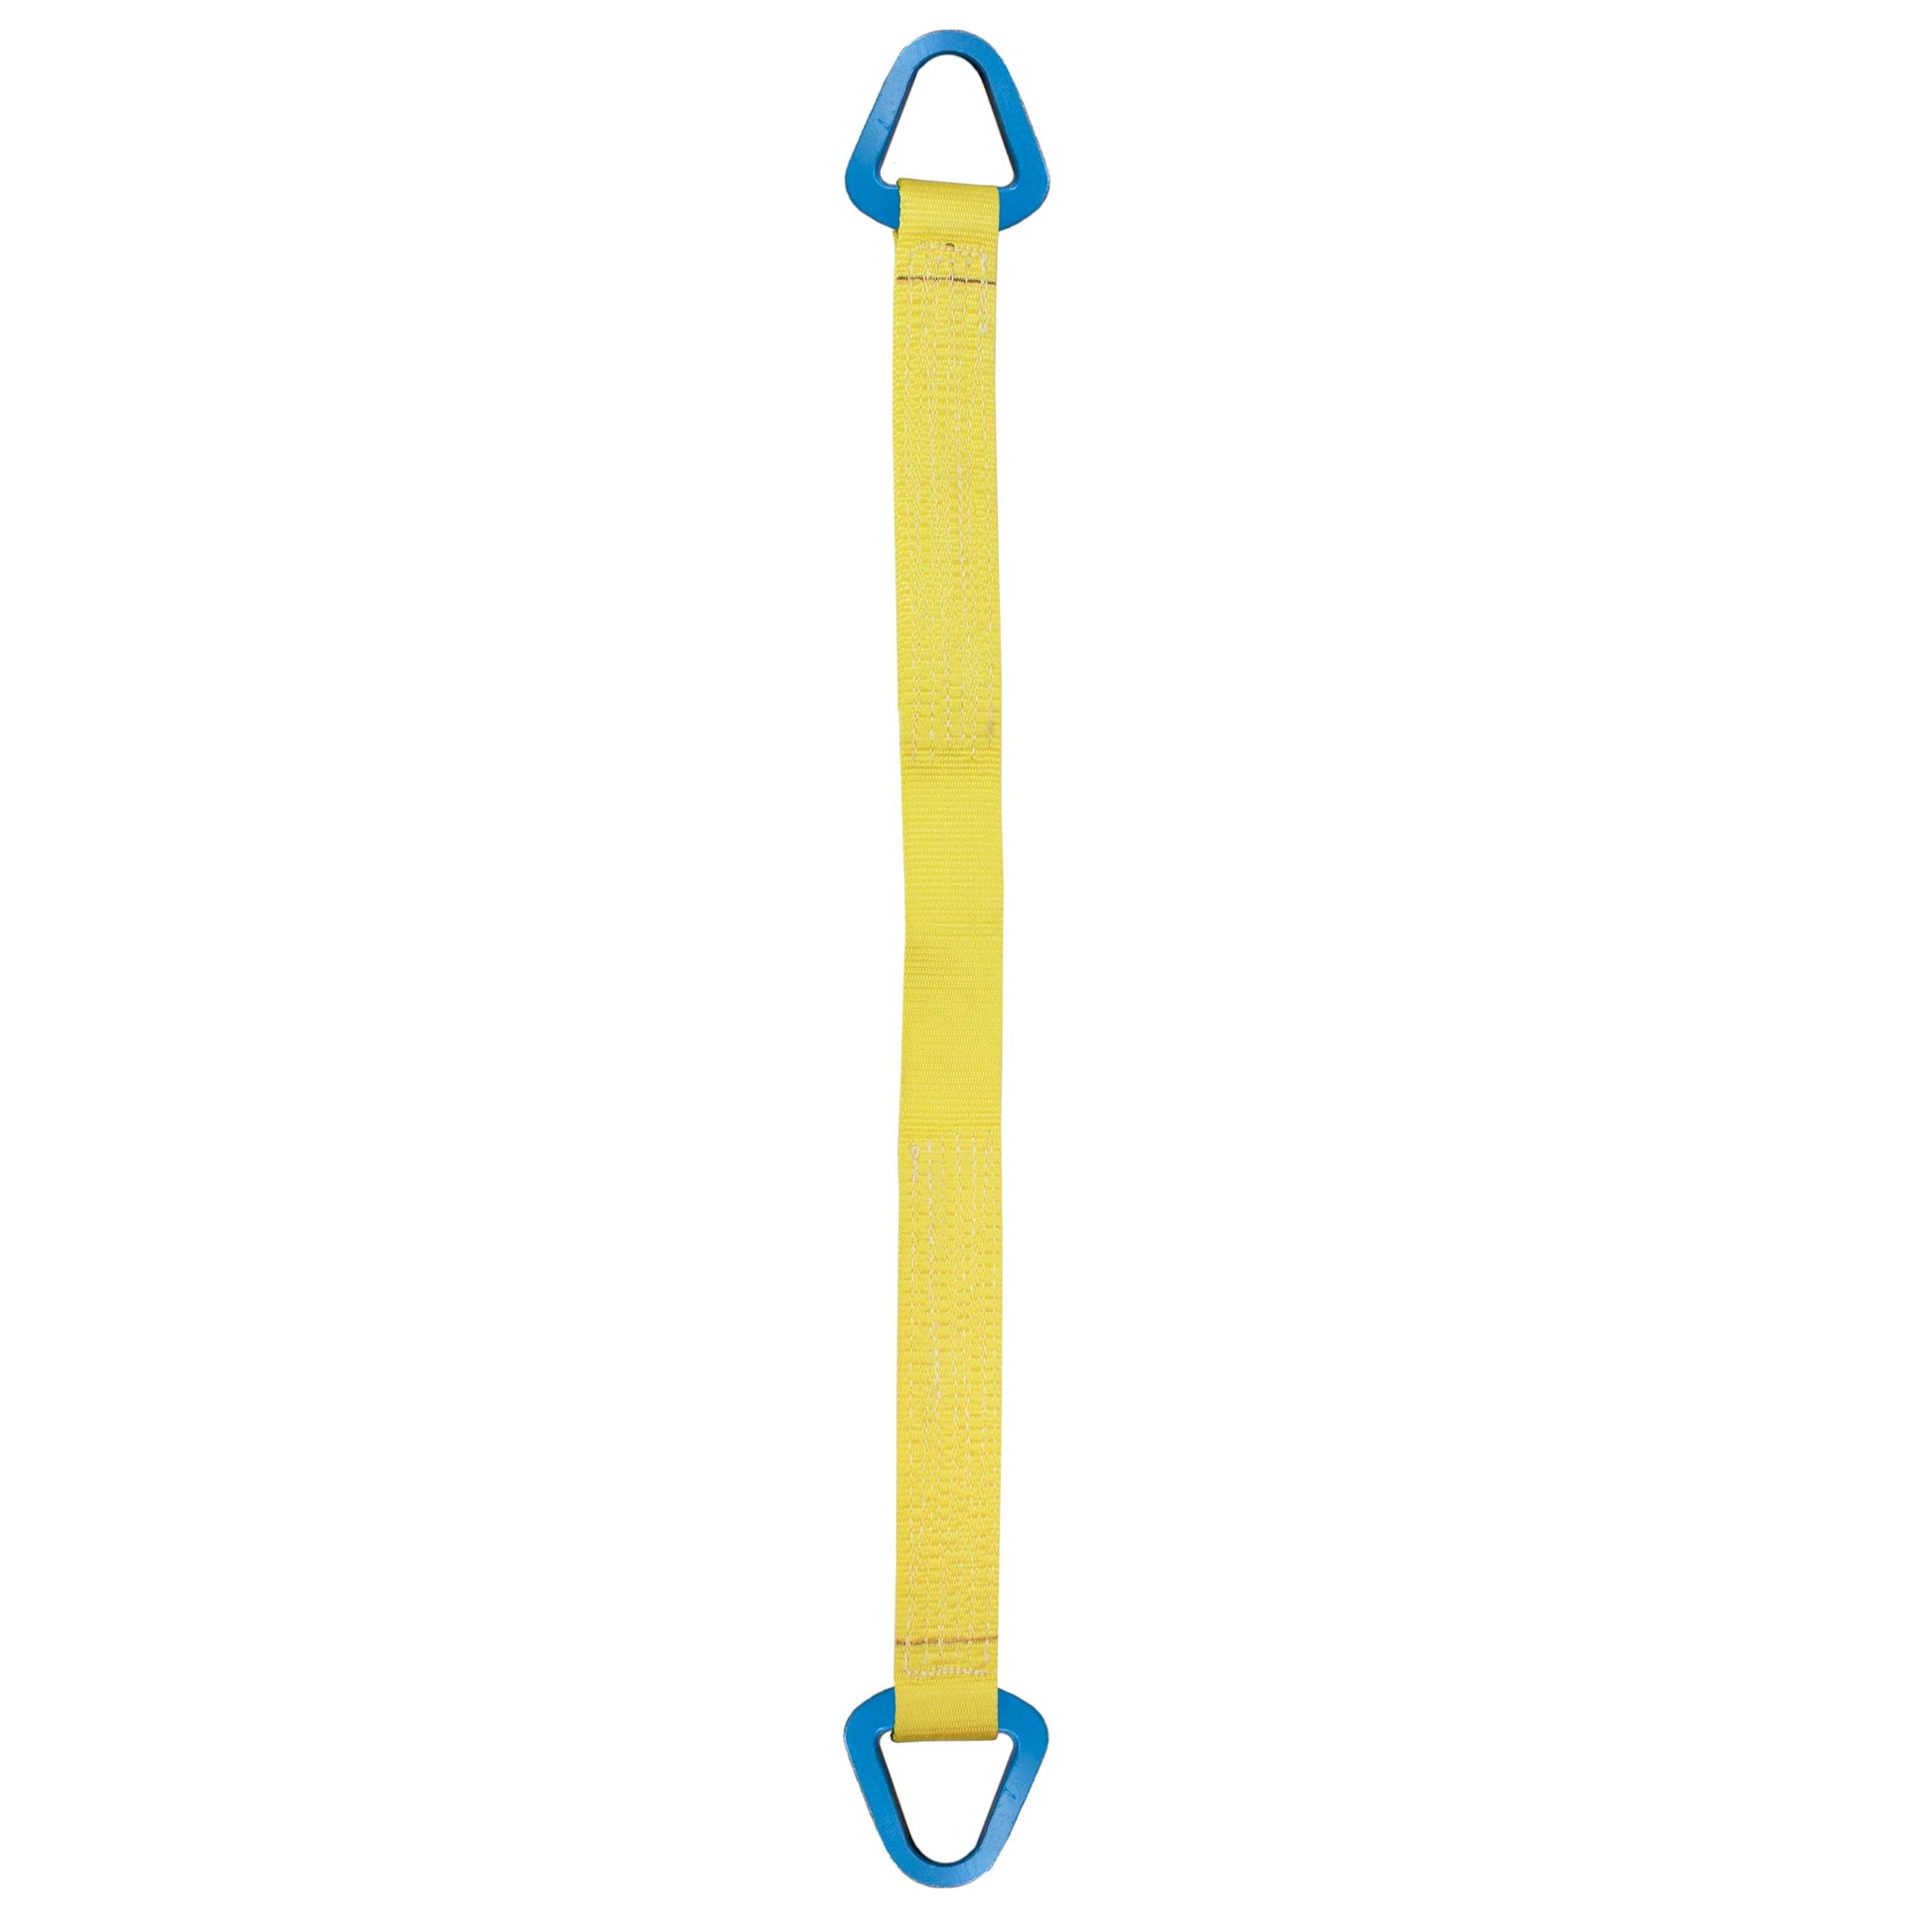 Nylon Lifting Sling Triangle 8 inch x 6 foot 1ply image 1 of 2